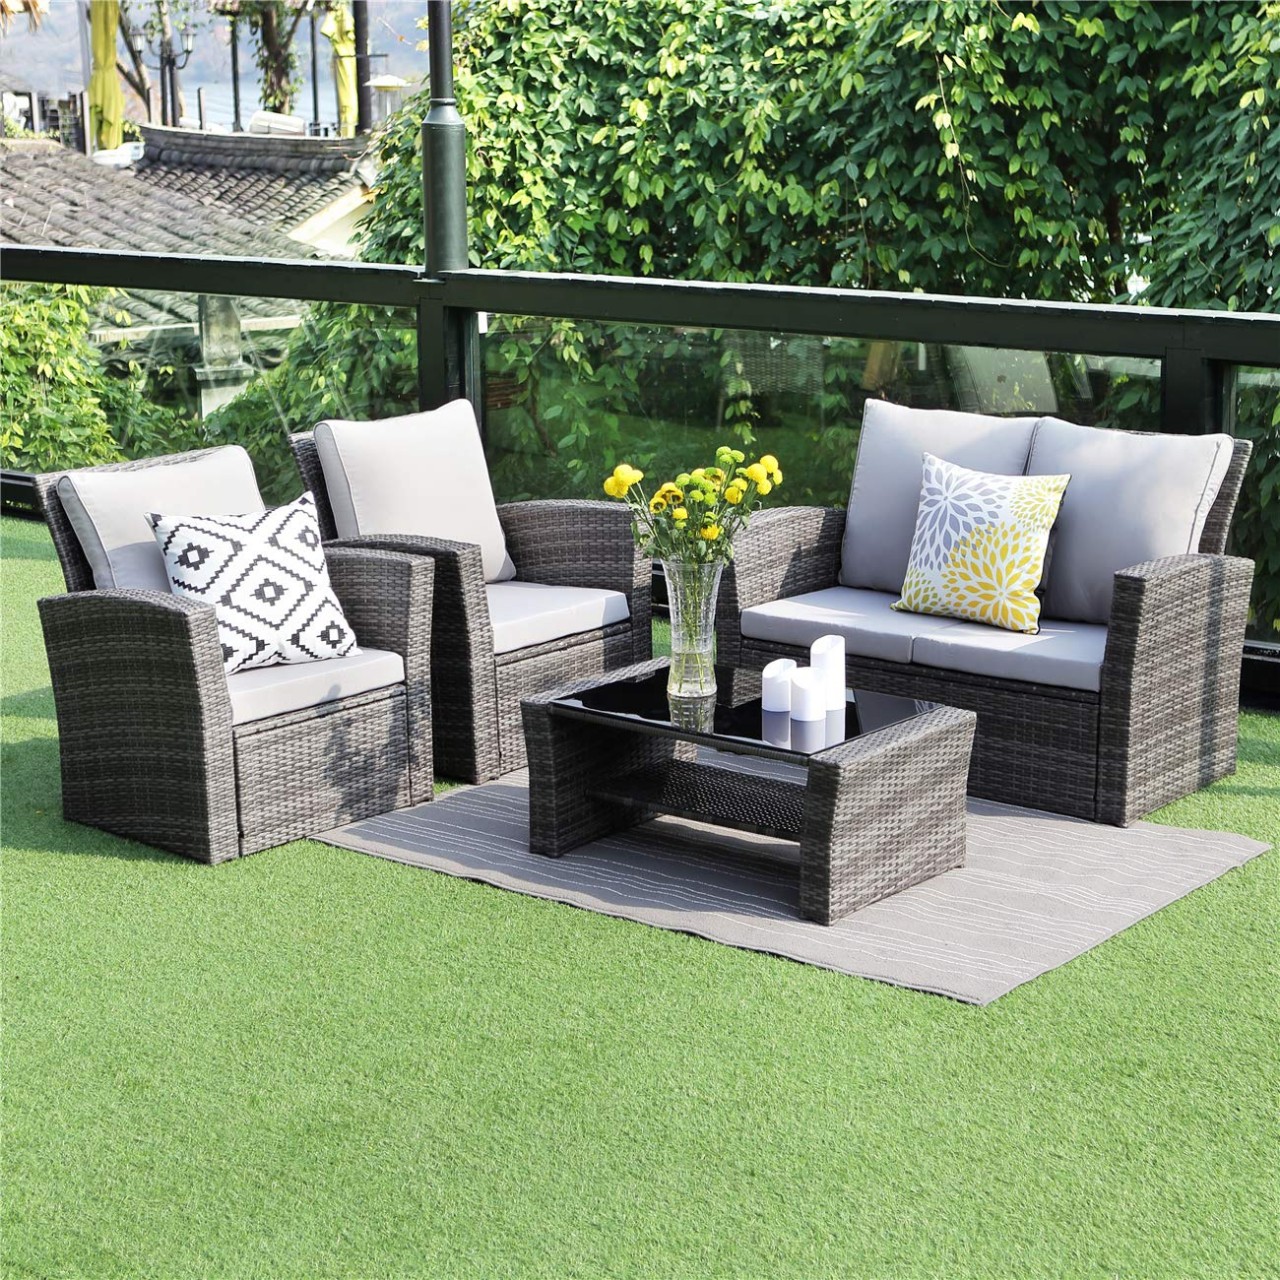 5 Piece Outdoor Patio Furniture Sets, Wicker Ratten Sectional Sofa with